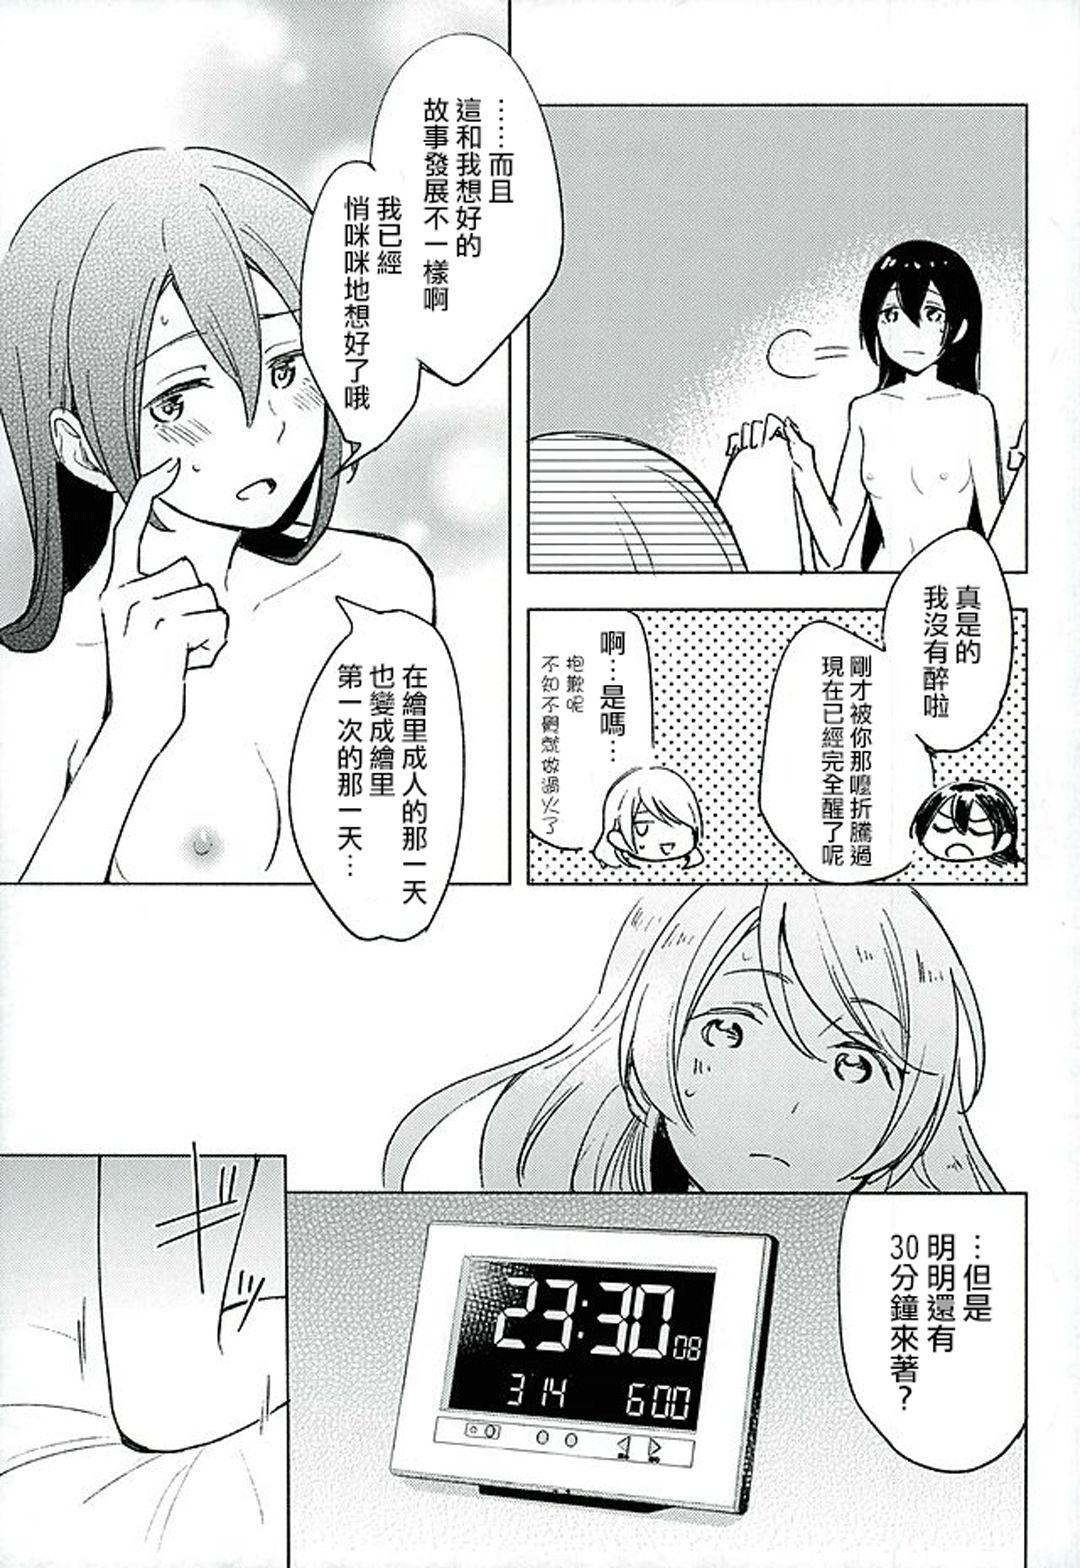 Prostitute CyanBlue - Love live Bigtits - Page 9